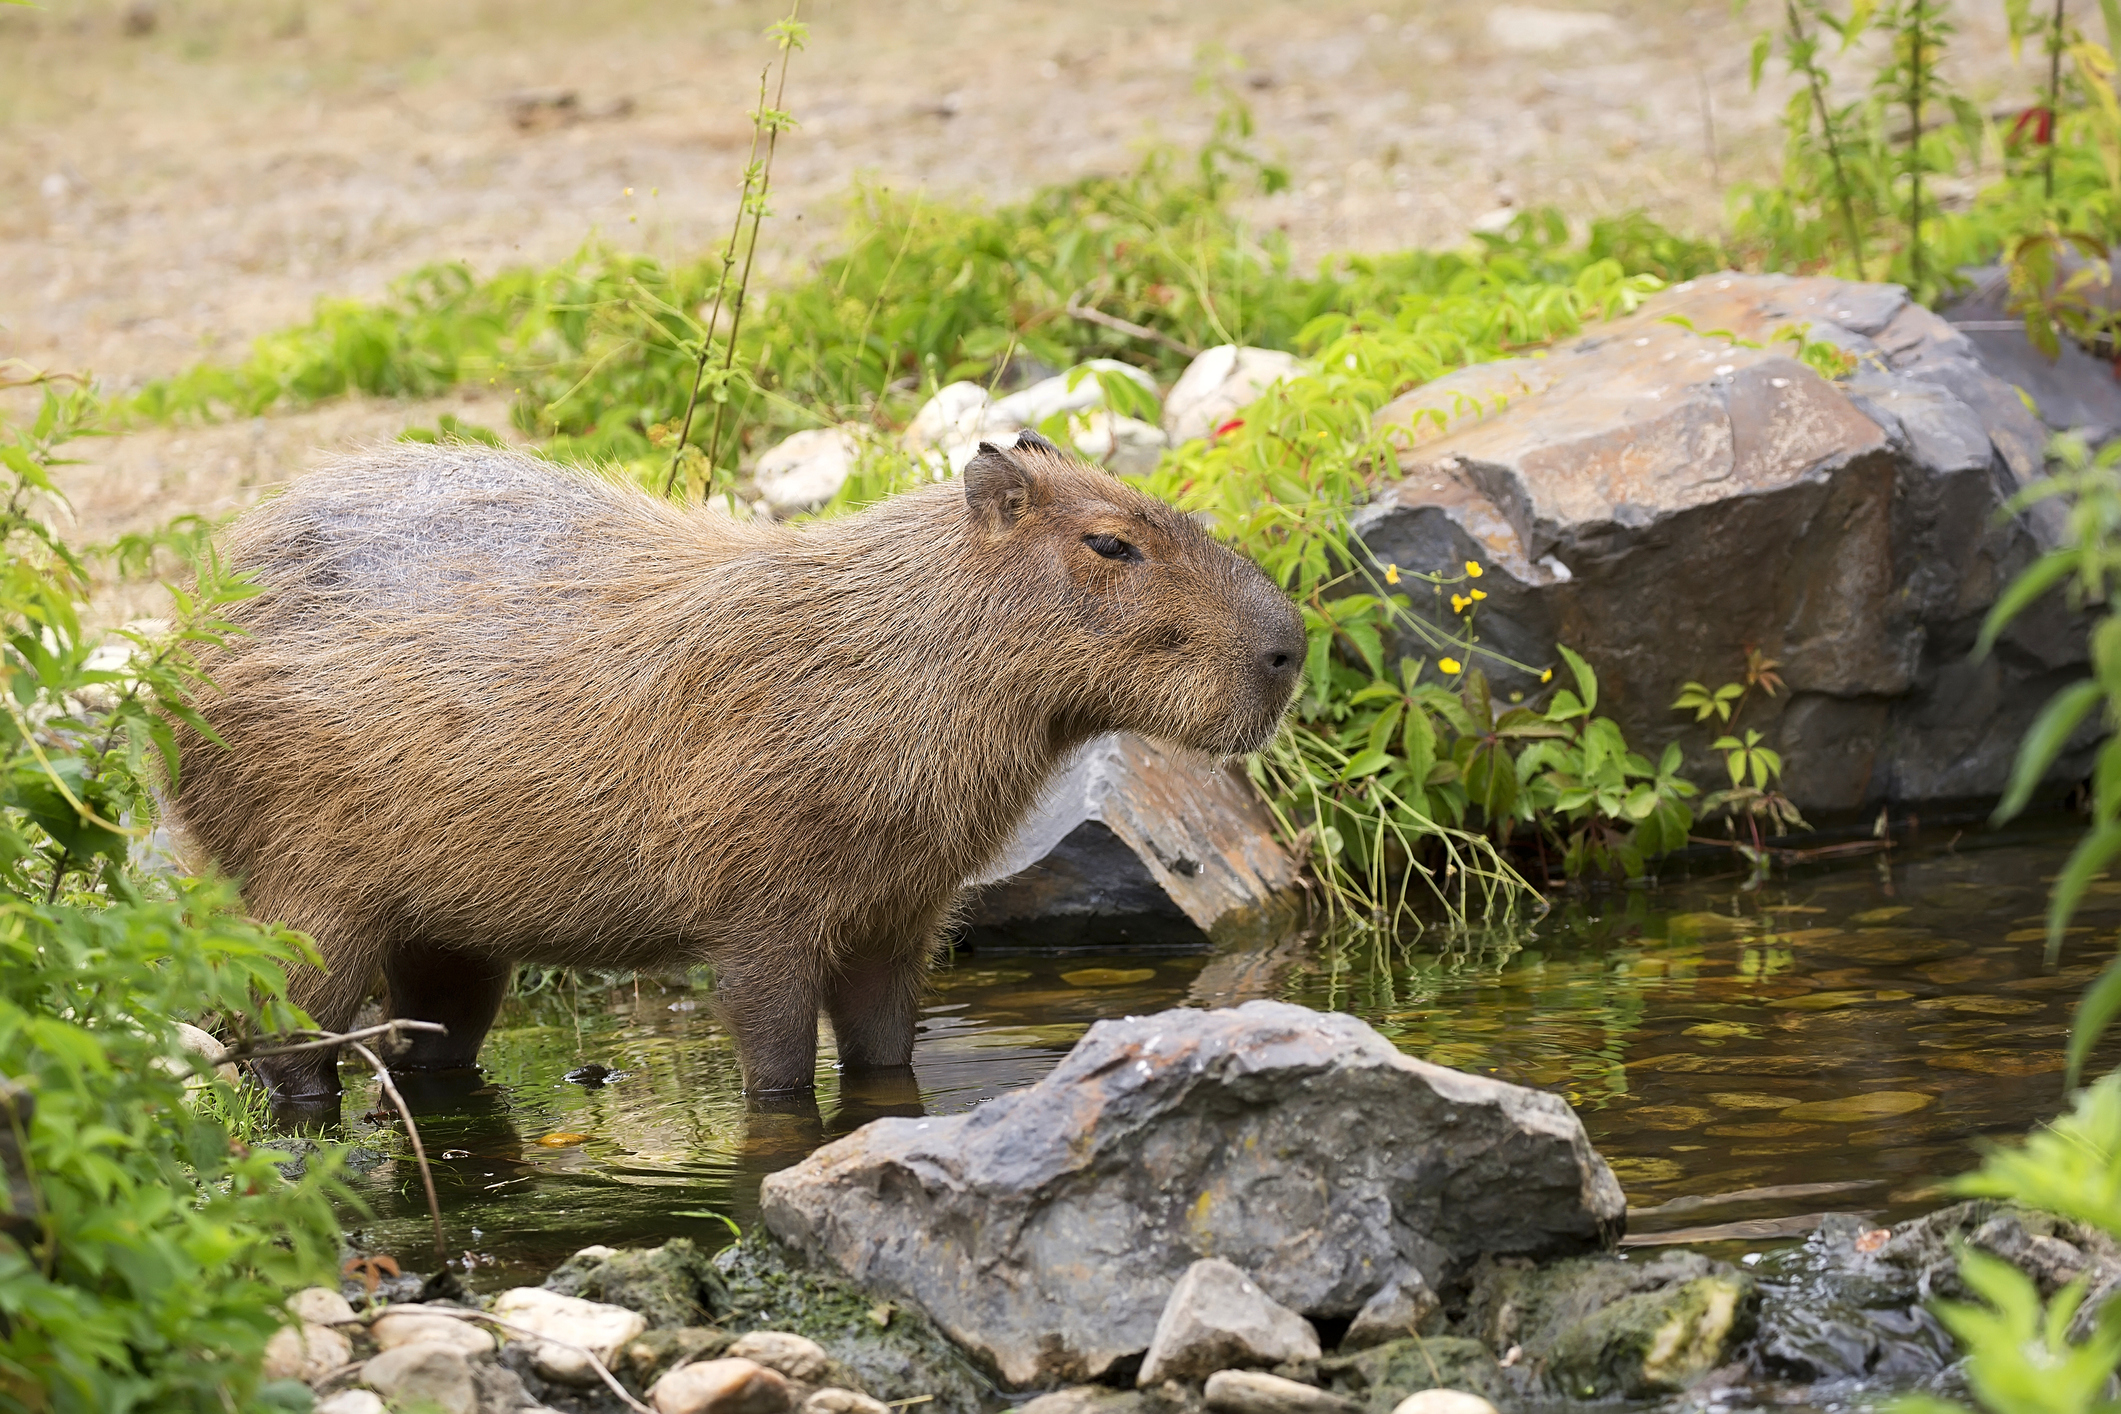 Capybara Are the Largest Rodents in the World.